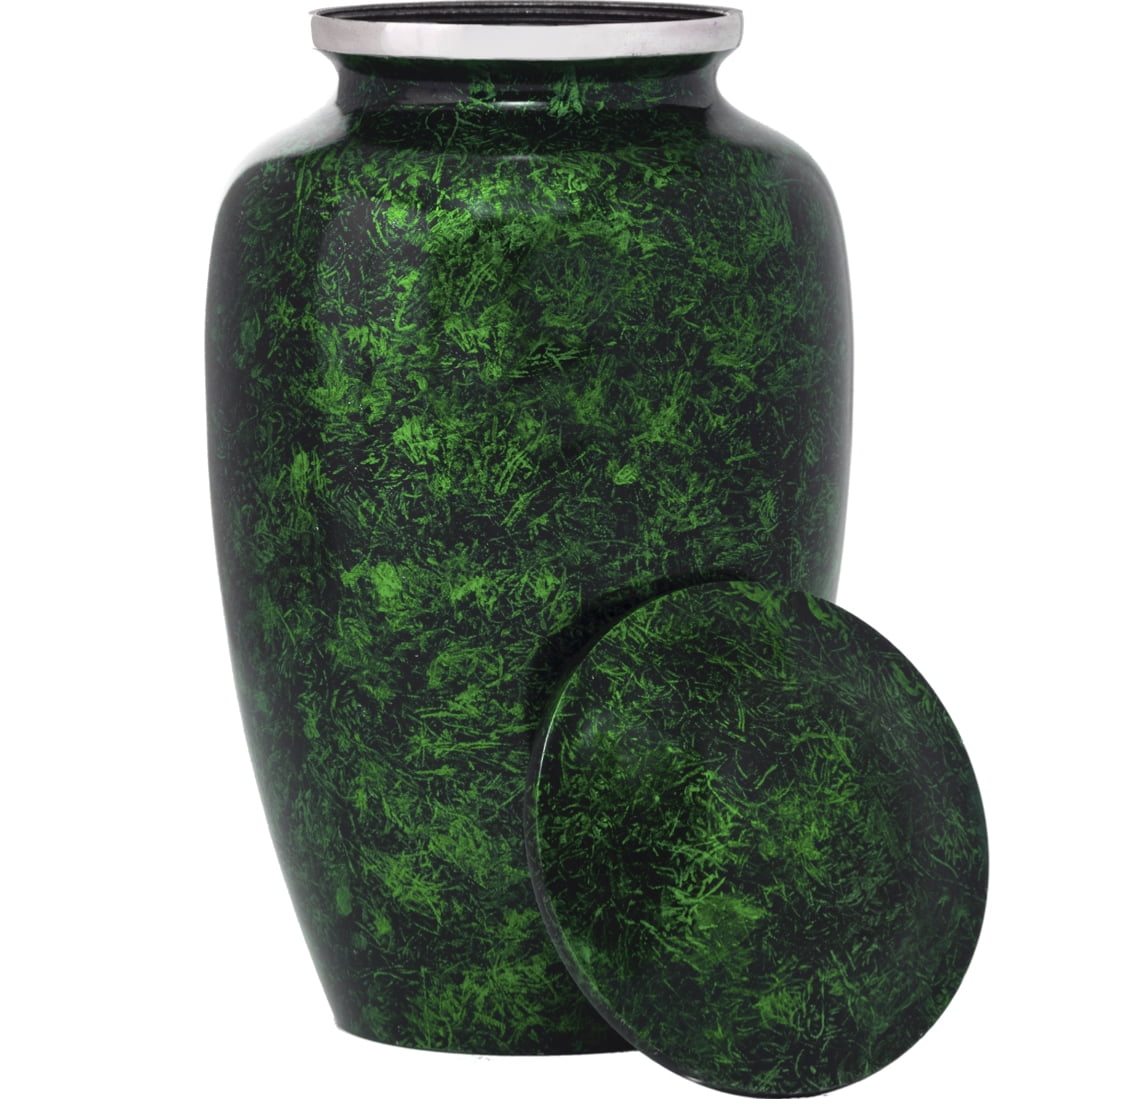 Eternal Harmony Cremation Urn for Human Funeral Ashes with Elegant Finishes to Honor and Remember Your Loved One Green Carefully Handcrafted 